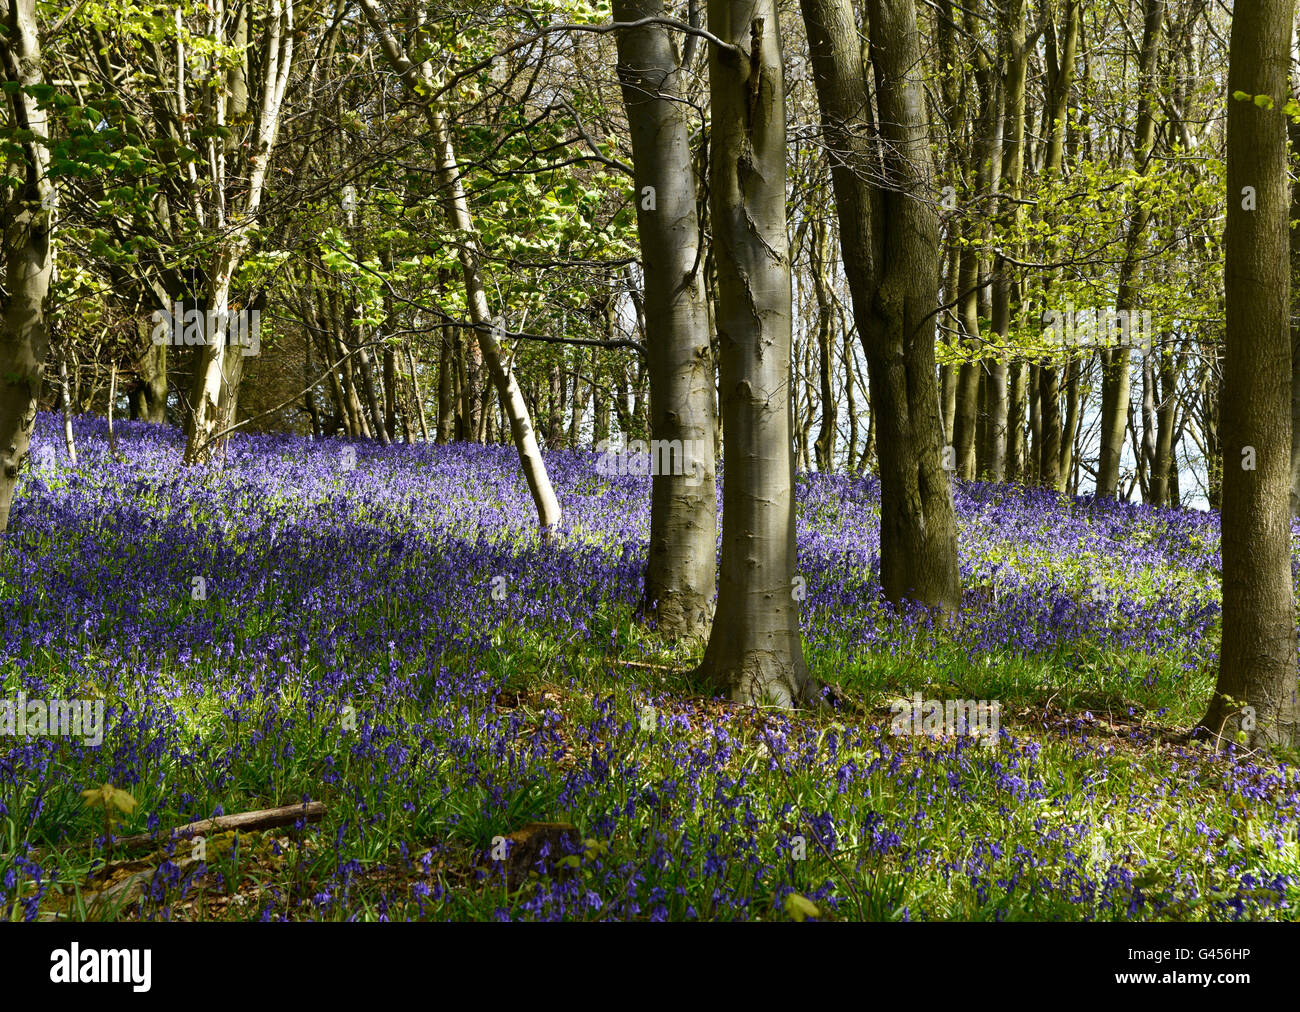 Flowering bluebells bloom in spring time covering large areas of woodland floors protected by National Trust for conservation. Stock Photo